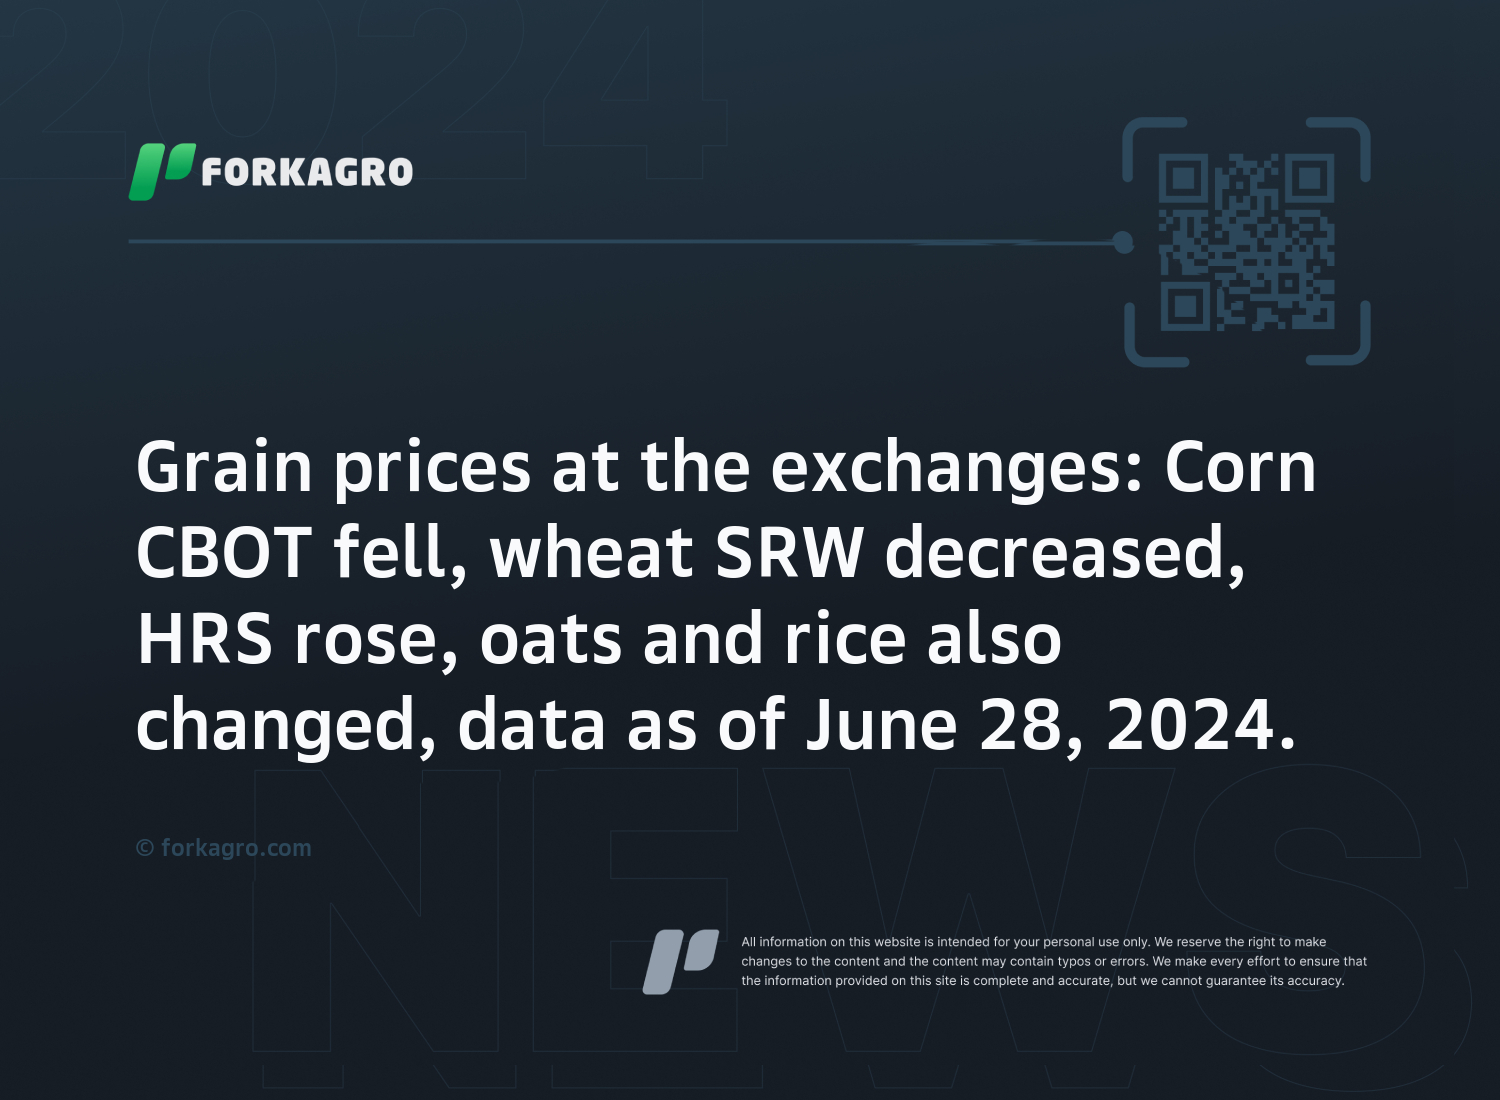 Grain prices at the exchanges: Corn CBOT fell, wheat SRW decreased, HRS rose, oats and rice also changed, data as of June 28, 2024.